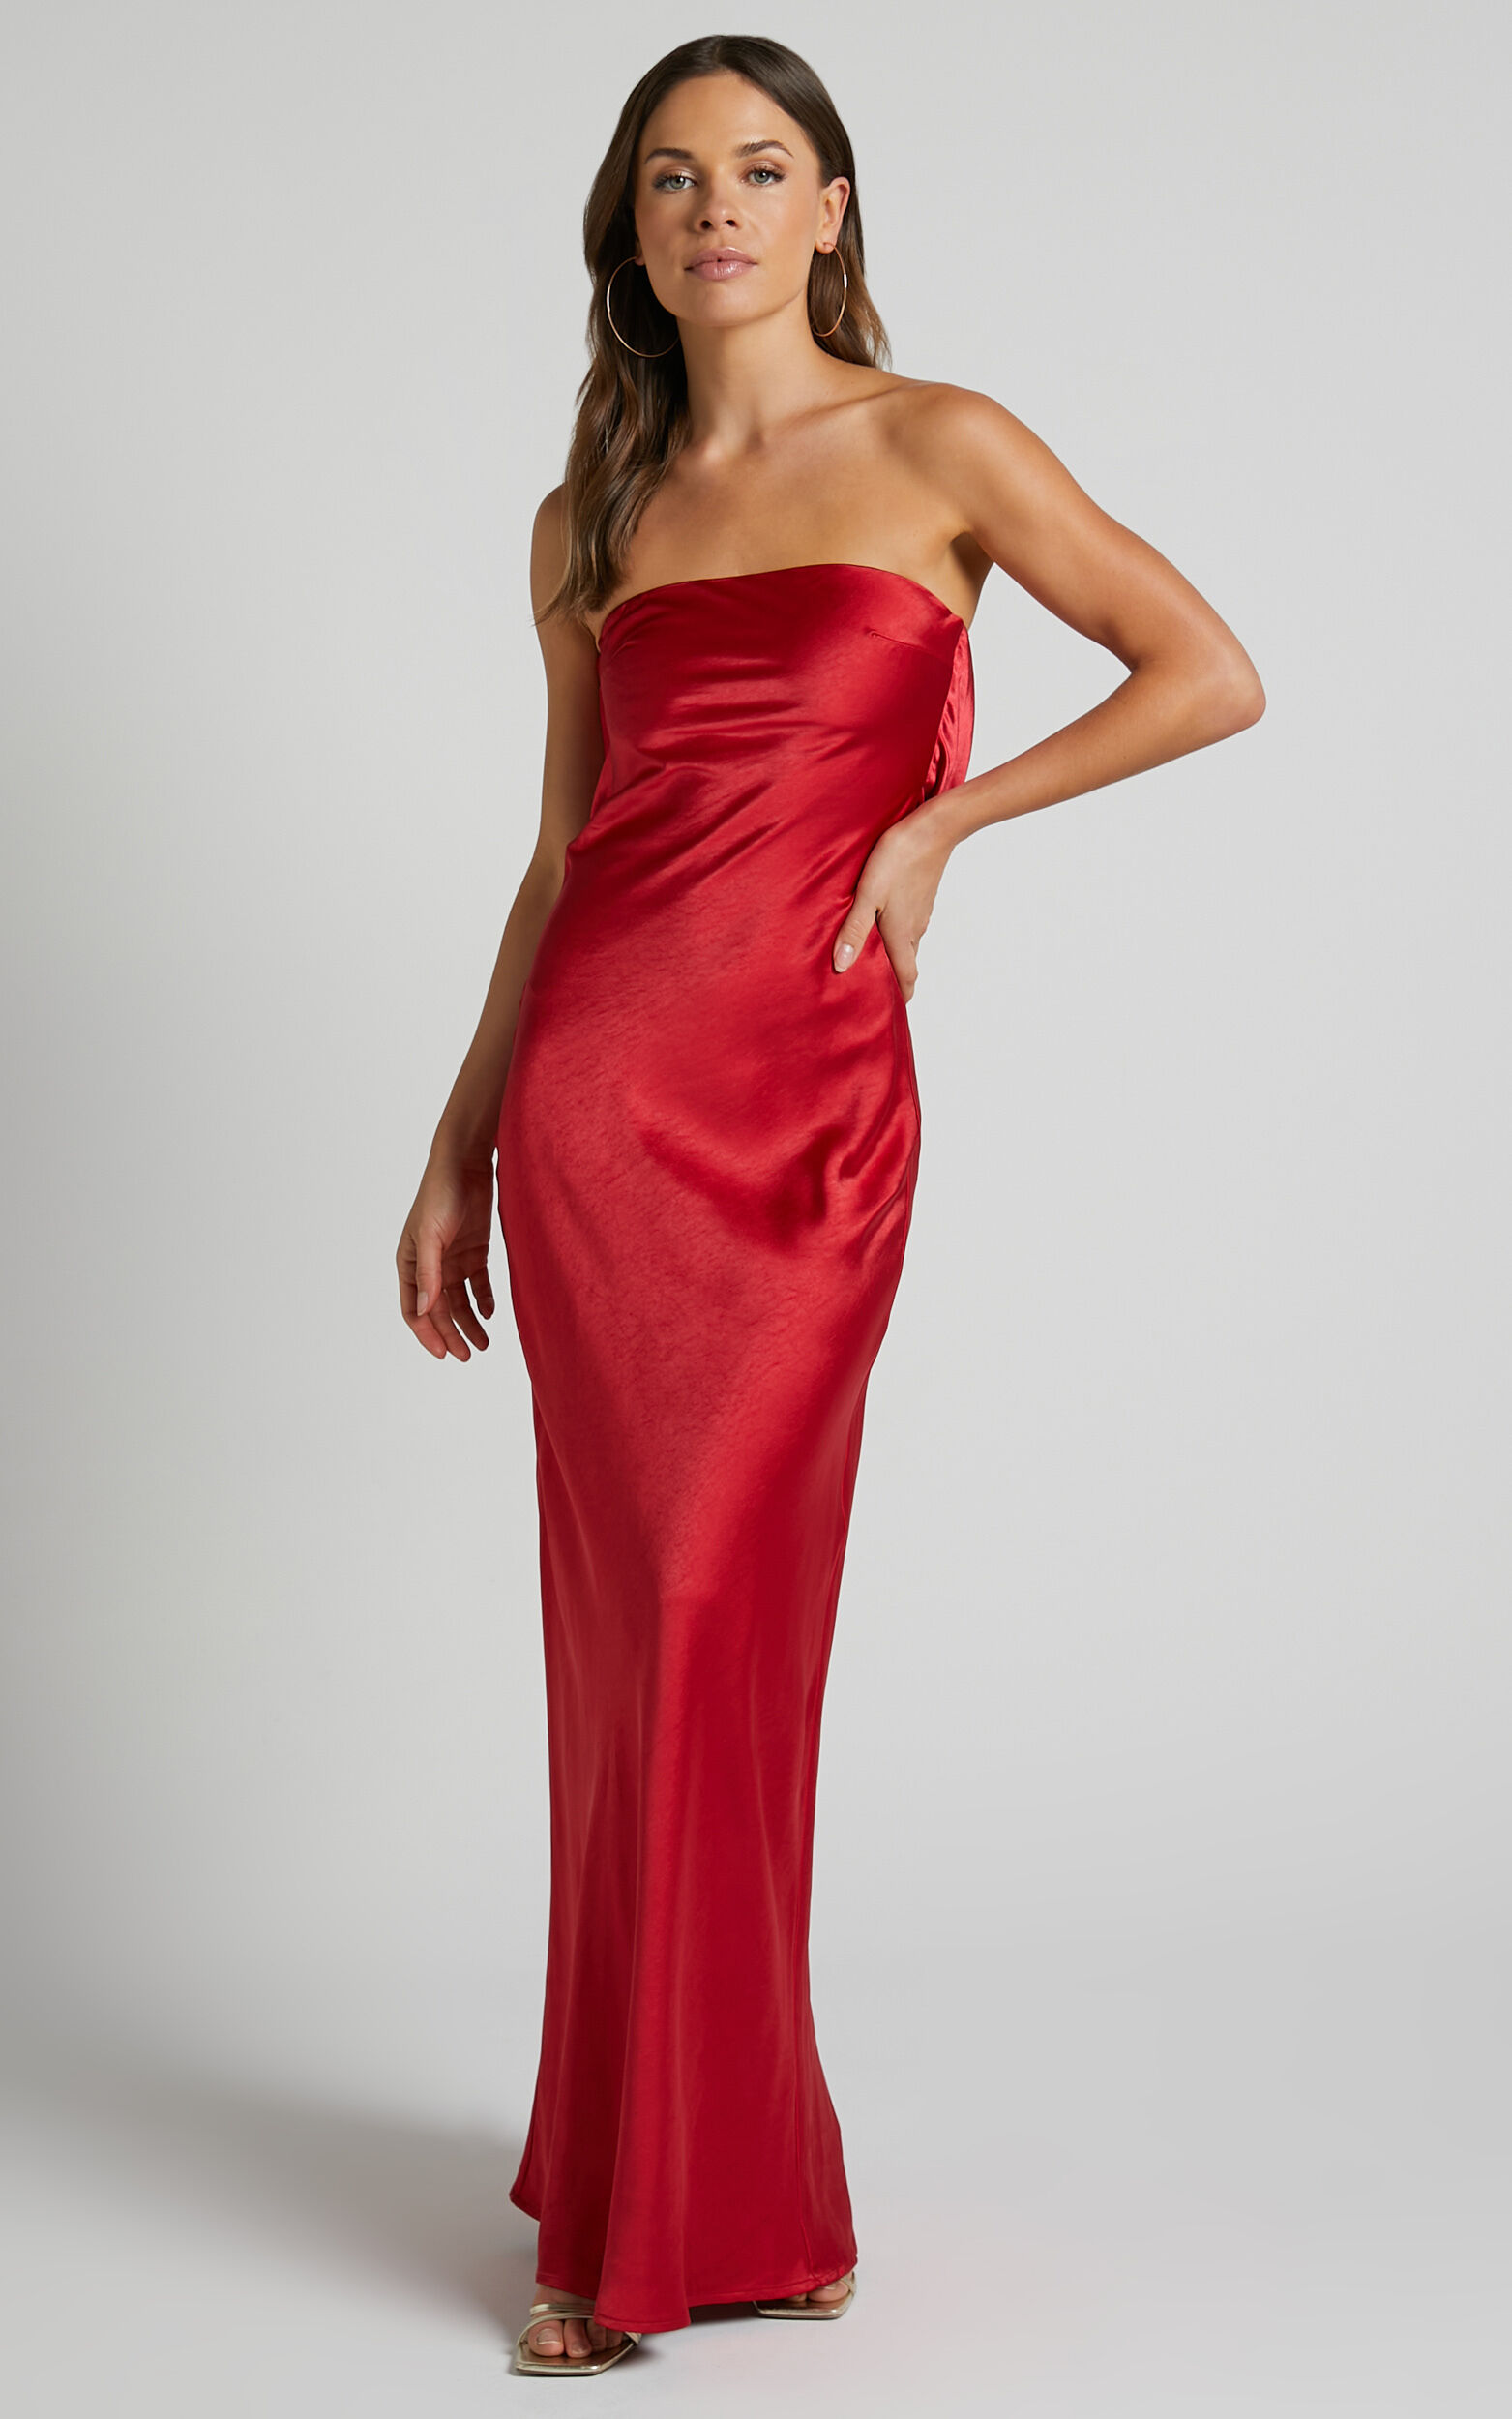 Charlita Strapless Cowl Back Satin Maxi Dress in Cherry Red - 06, RED1, super-hi-res image number null